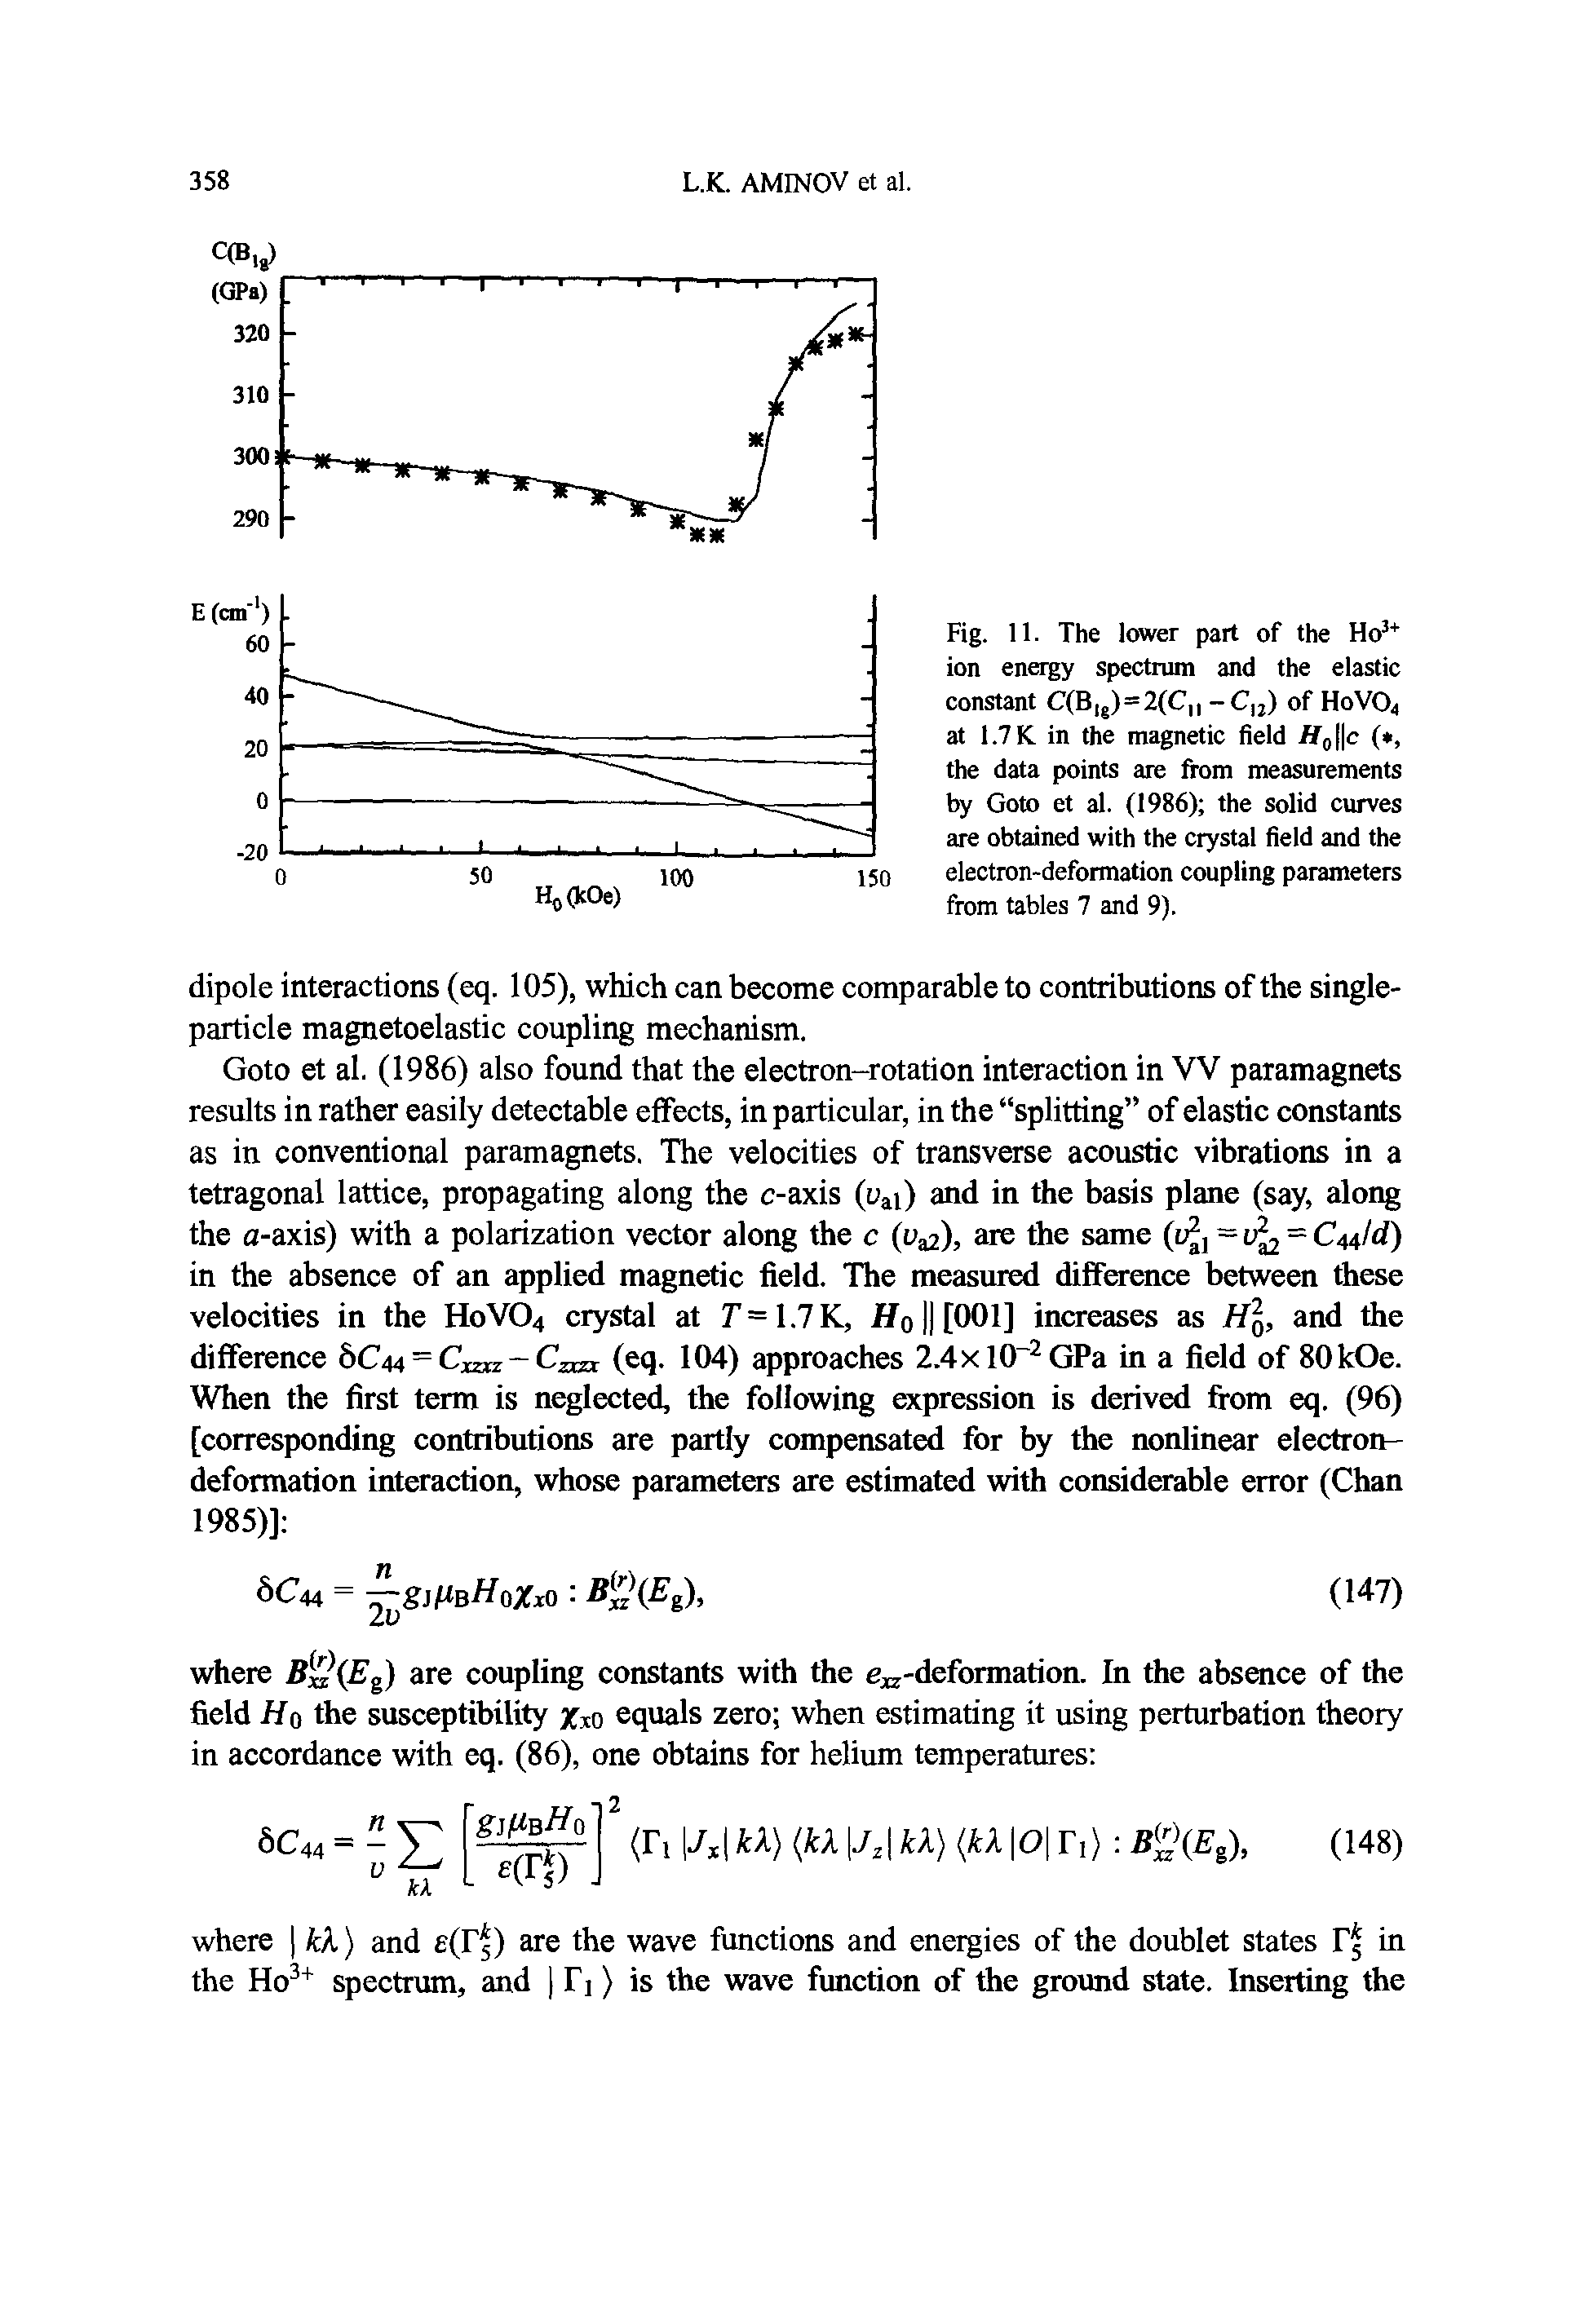 Fig. 11. The lower part of the Ho ion energy spectrum and the elastic constant C(B g)=2(C, -C ) of H0VO4 at 1.7K. in the magnetic field Hq c ( , the data points are from measurements by Goto et al. (1986) the solid curves are obtained with the crystal field and the electron-deformation coupling parameters from tables 7 and 9).